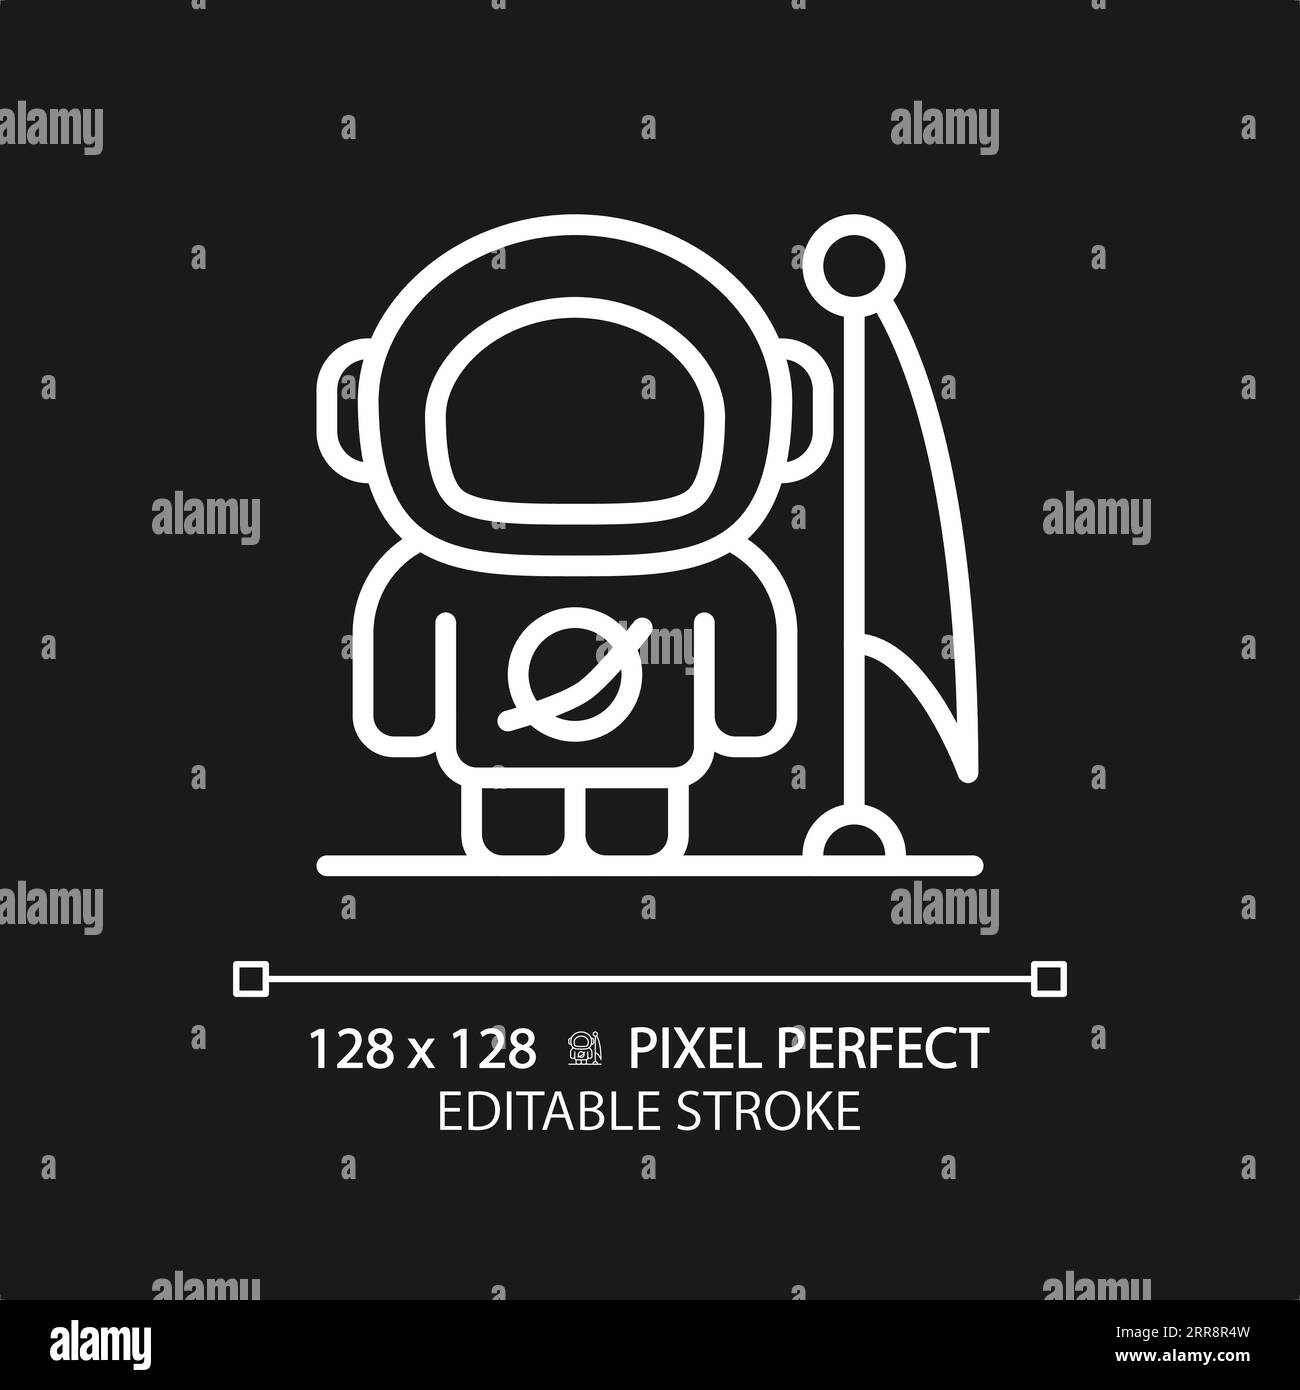 Man on moon pixel perfect white linear icon for dark theme Stock Vector